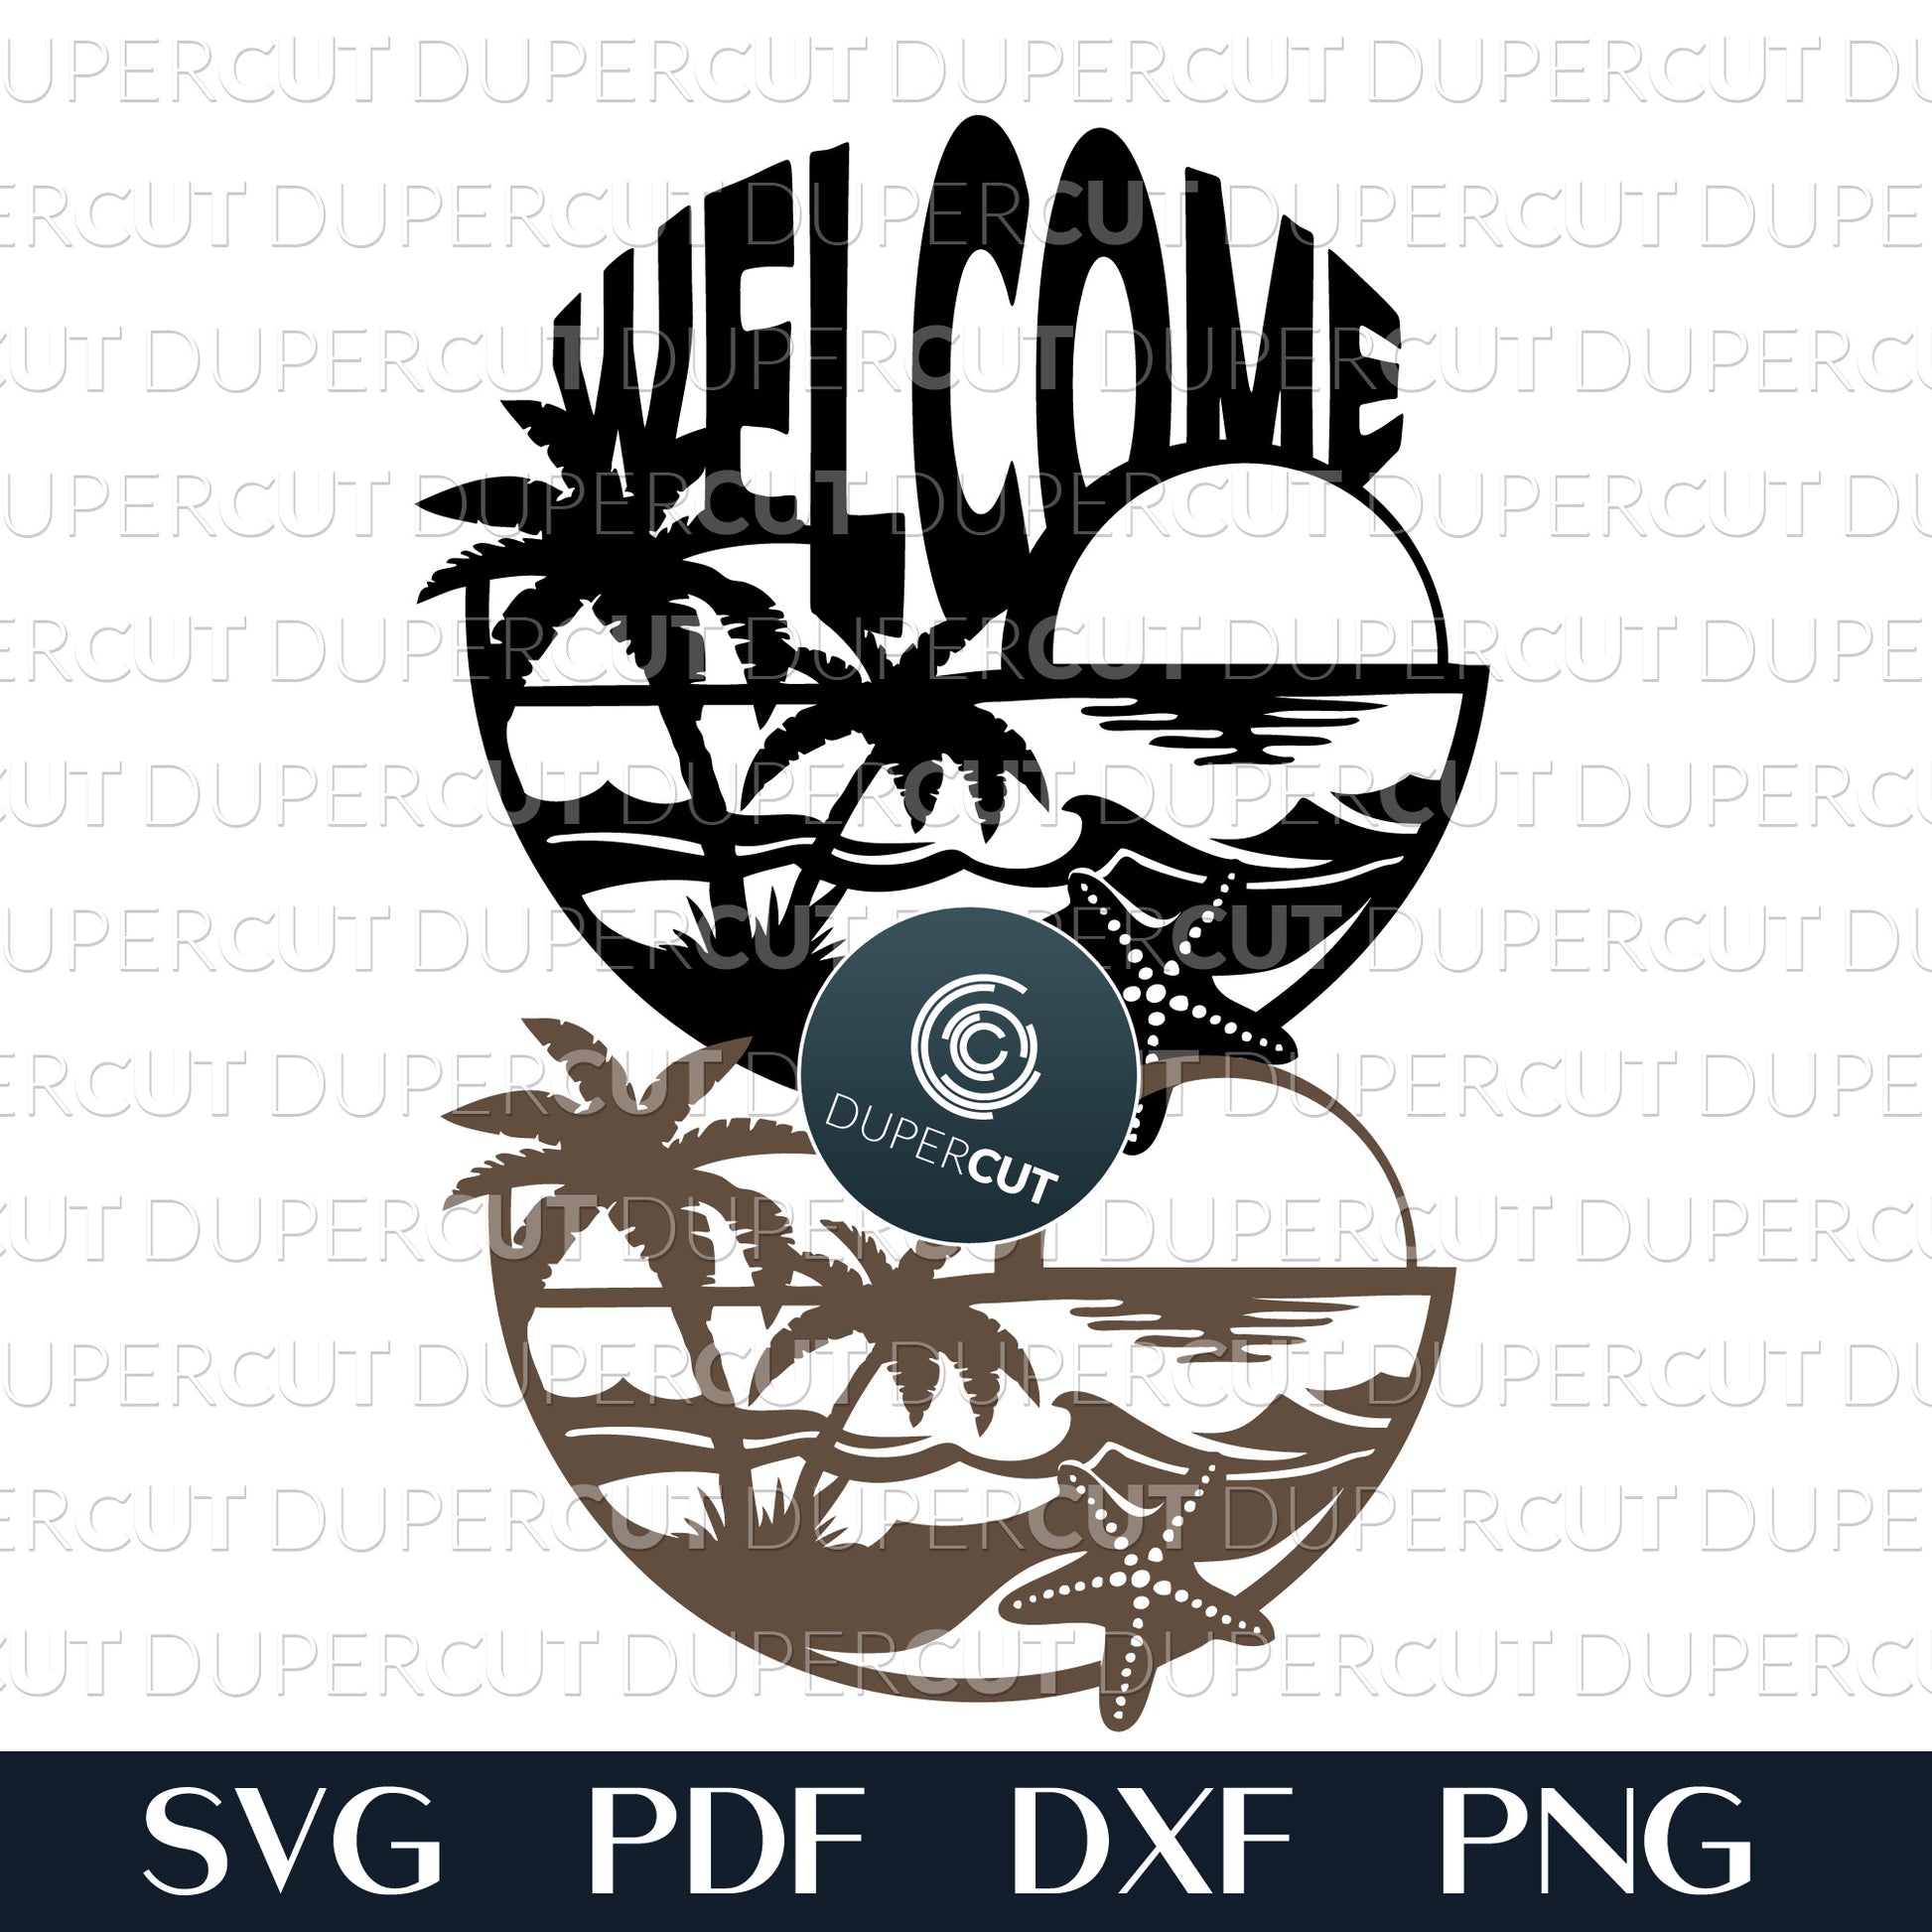 Beach sunset palm trees welcome sign layered files. SVG PDF DXF cutting template for laser cutting, engraving, Glowforge, Cricut, Silhouette, CNC plasma